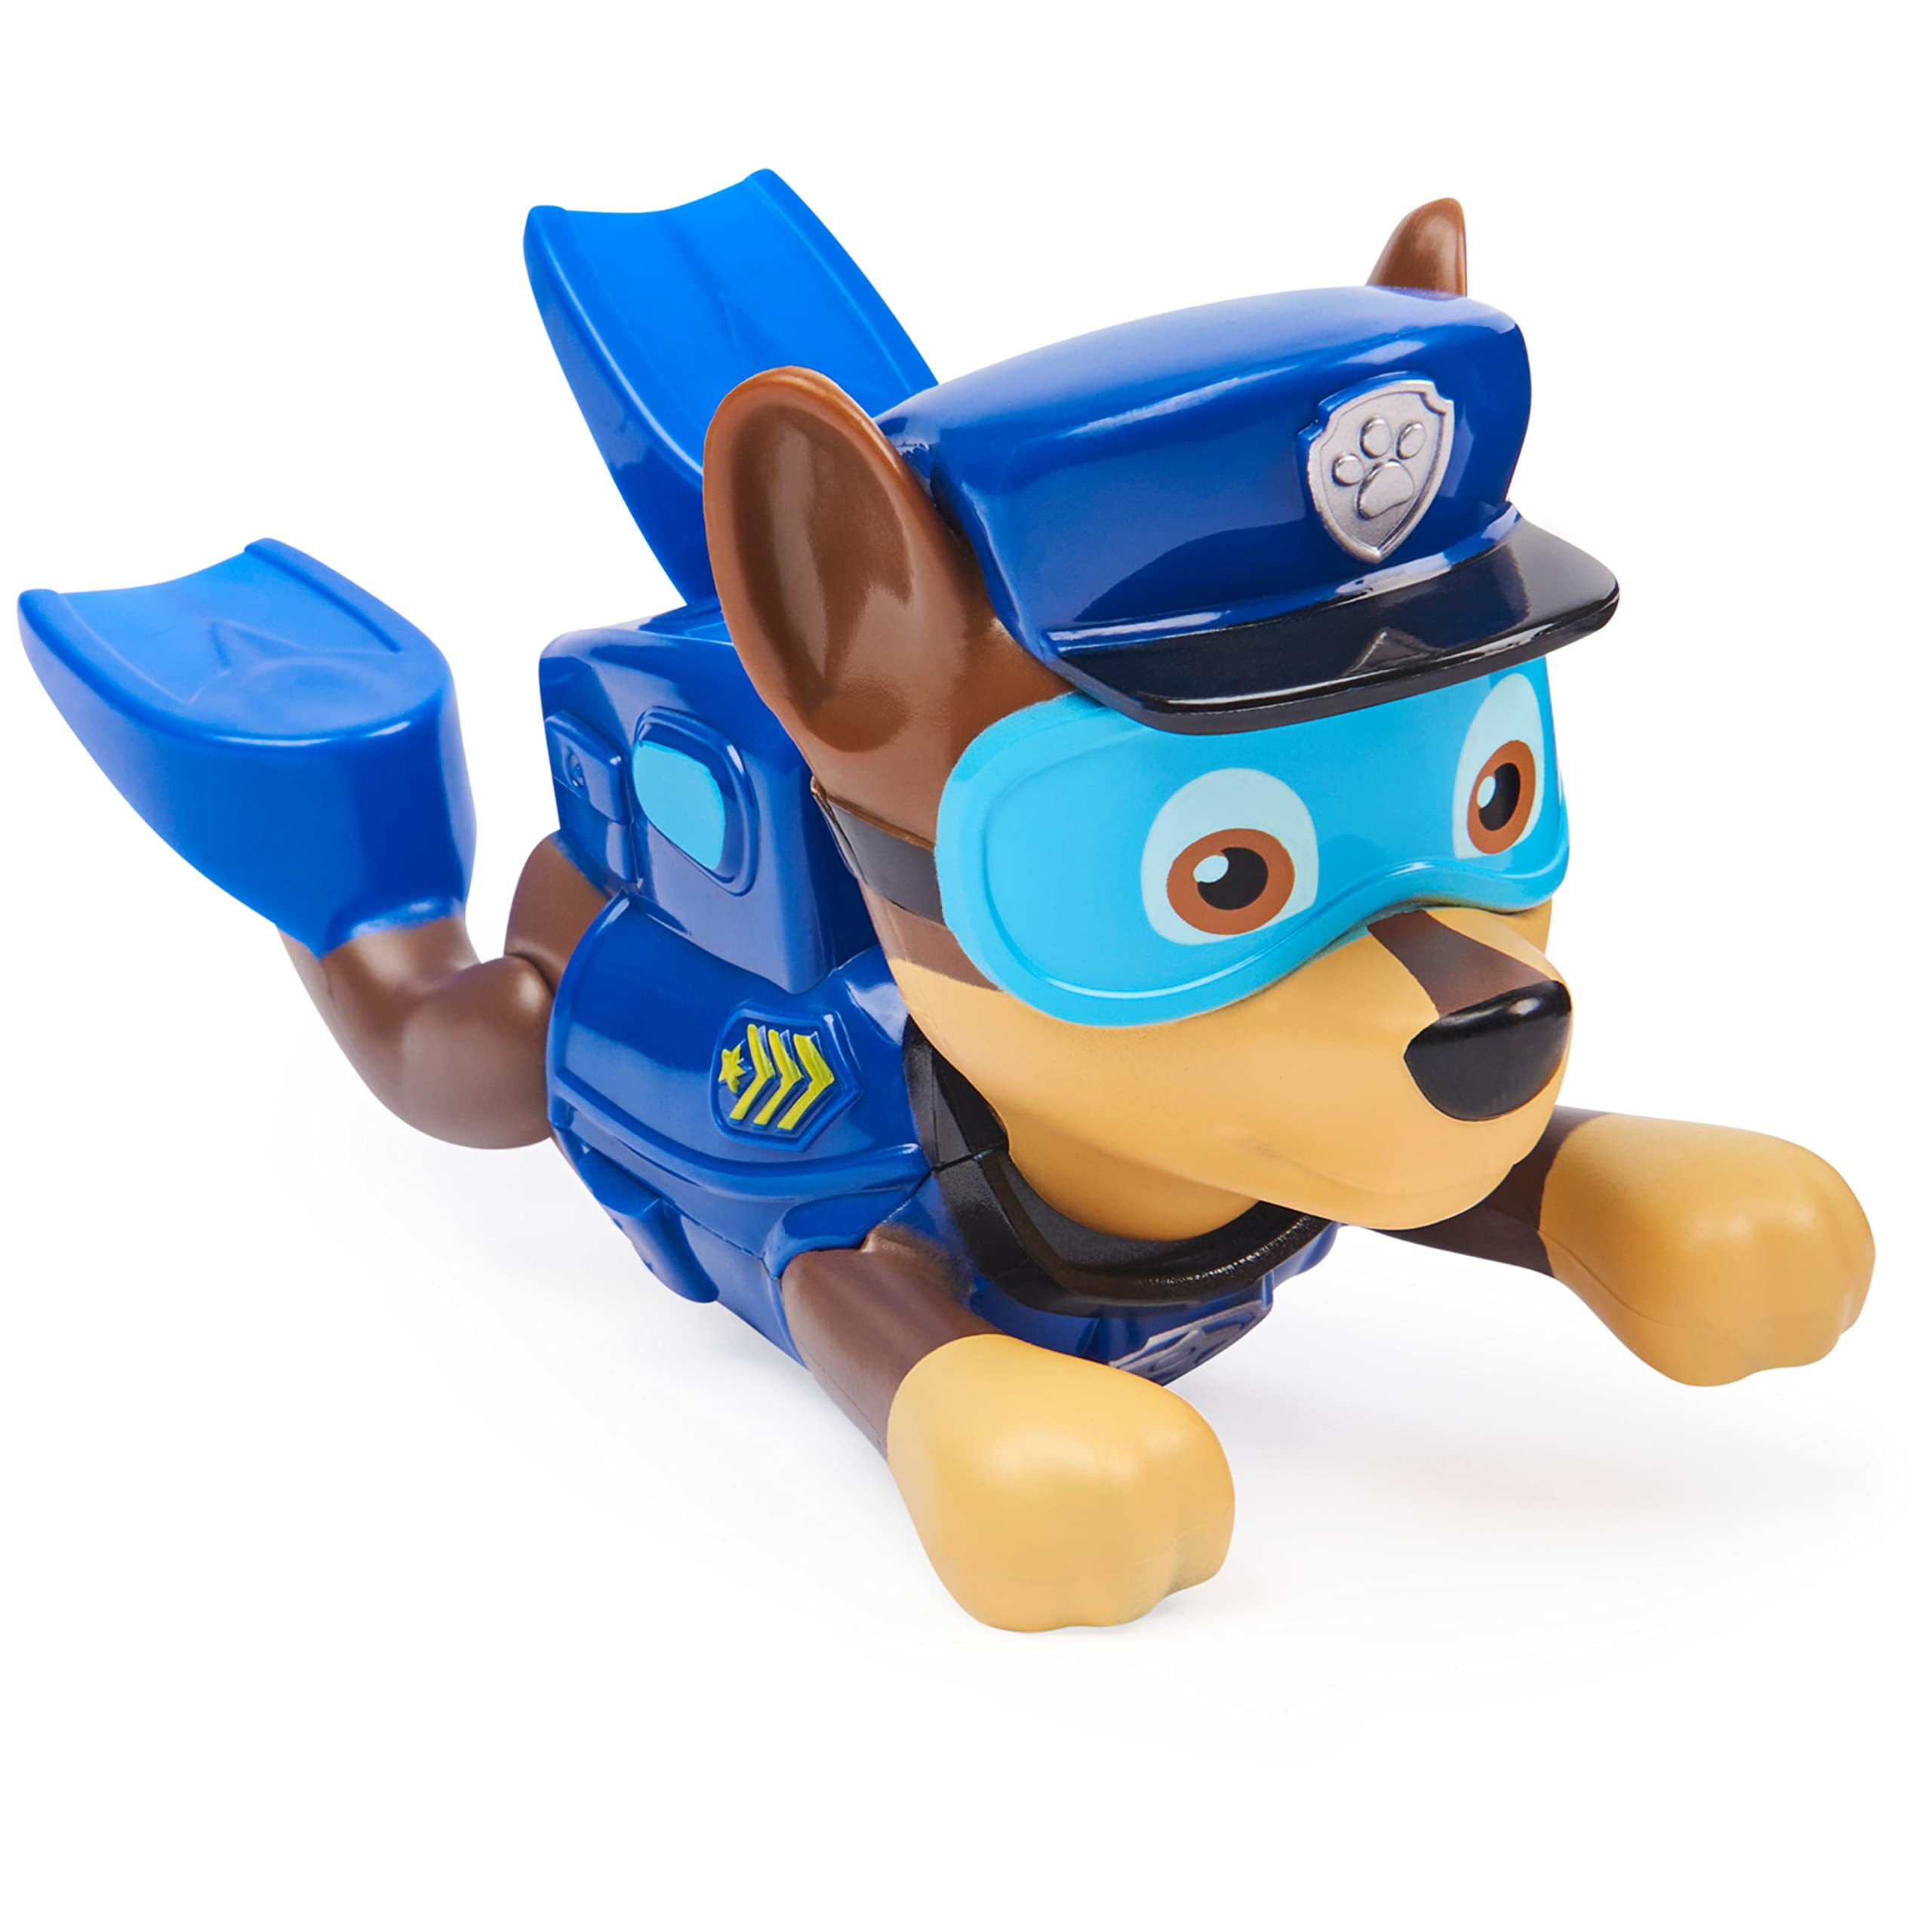 SwimWays Paw Patrol Paddlin' Pups Pool Toys & Outdoor Games, Bath Toys & Pool Party Supplies for Kids Aged 4 & Up, No Batteries Required